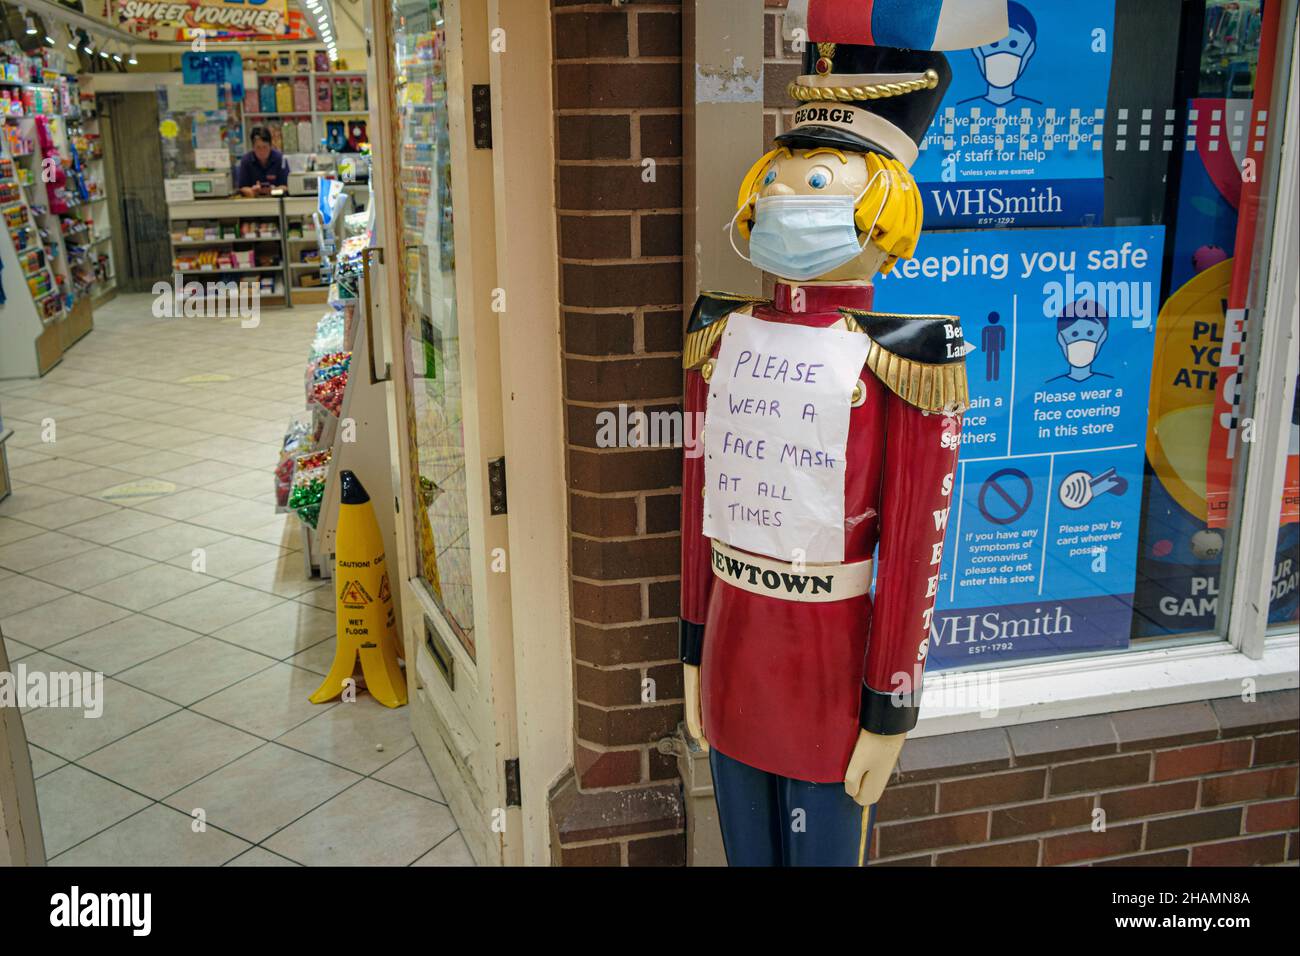 'Please wear a face mask at all times' - a sign outside a sweet shop during the Covid-19 pandemic in Newtown, Powys, Wales, 2021 Stock Photo